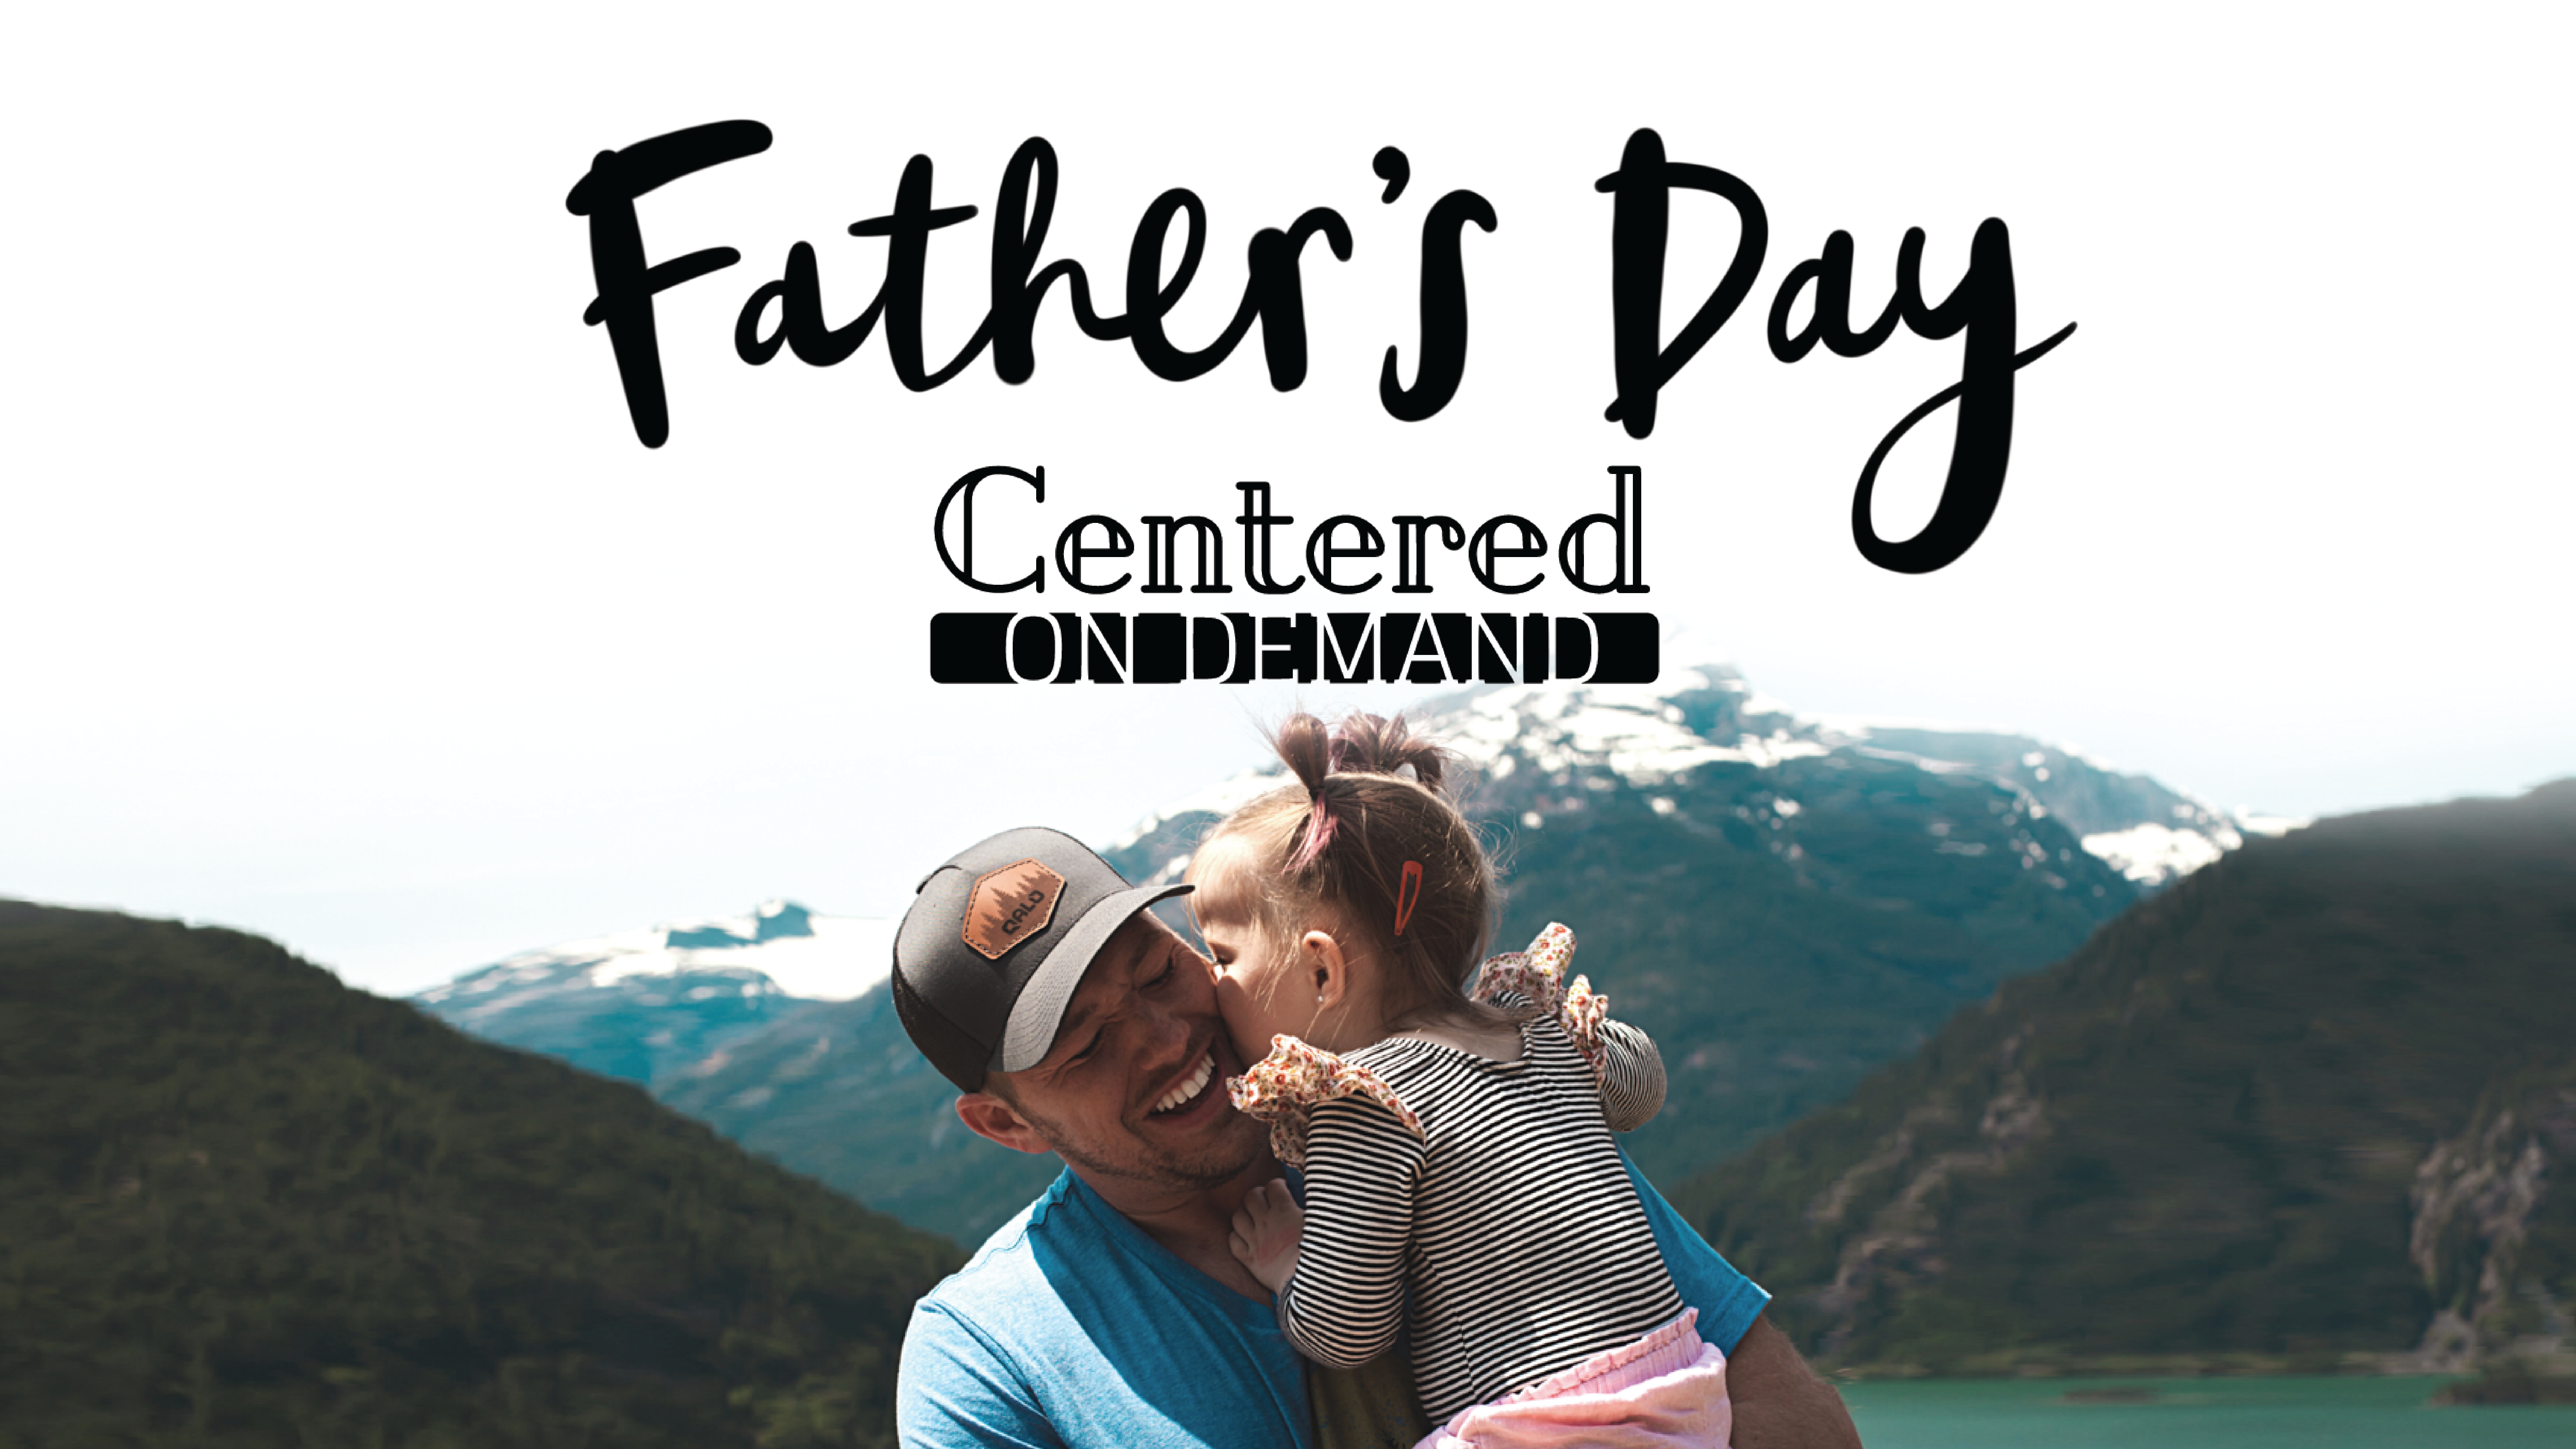 Father's Day Centered On Demand